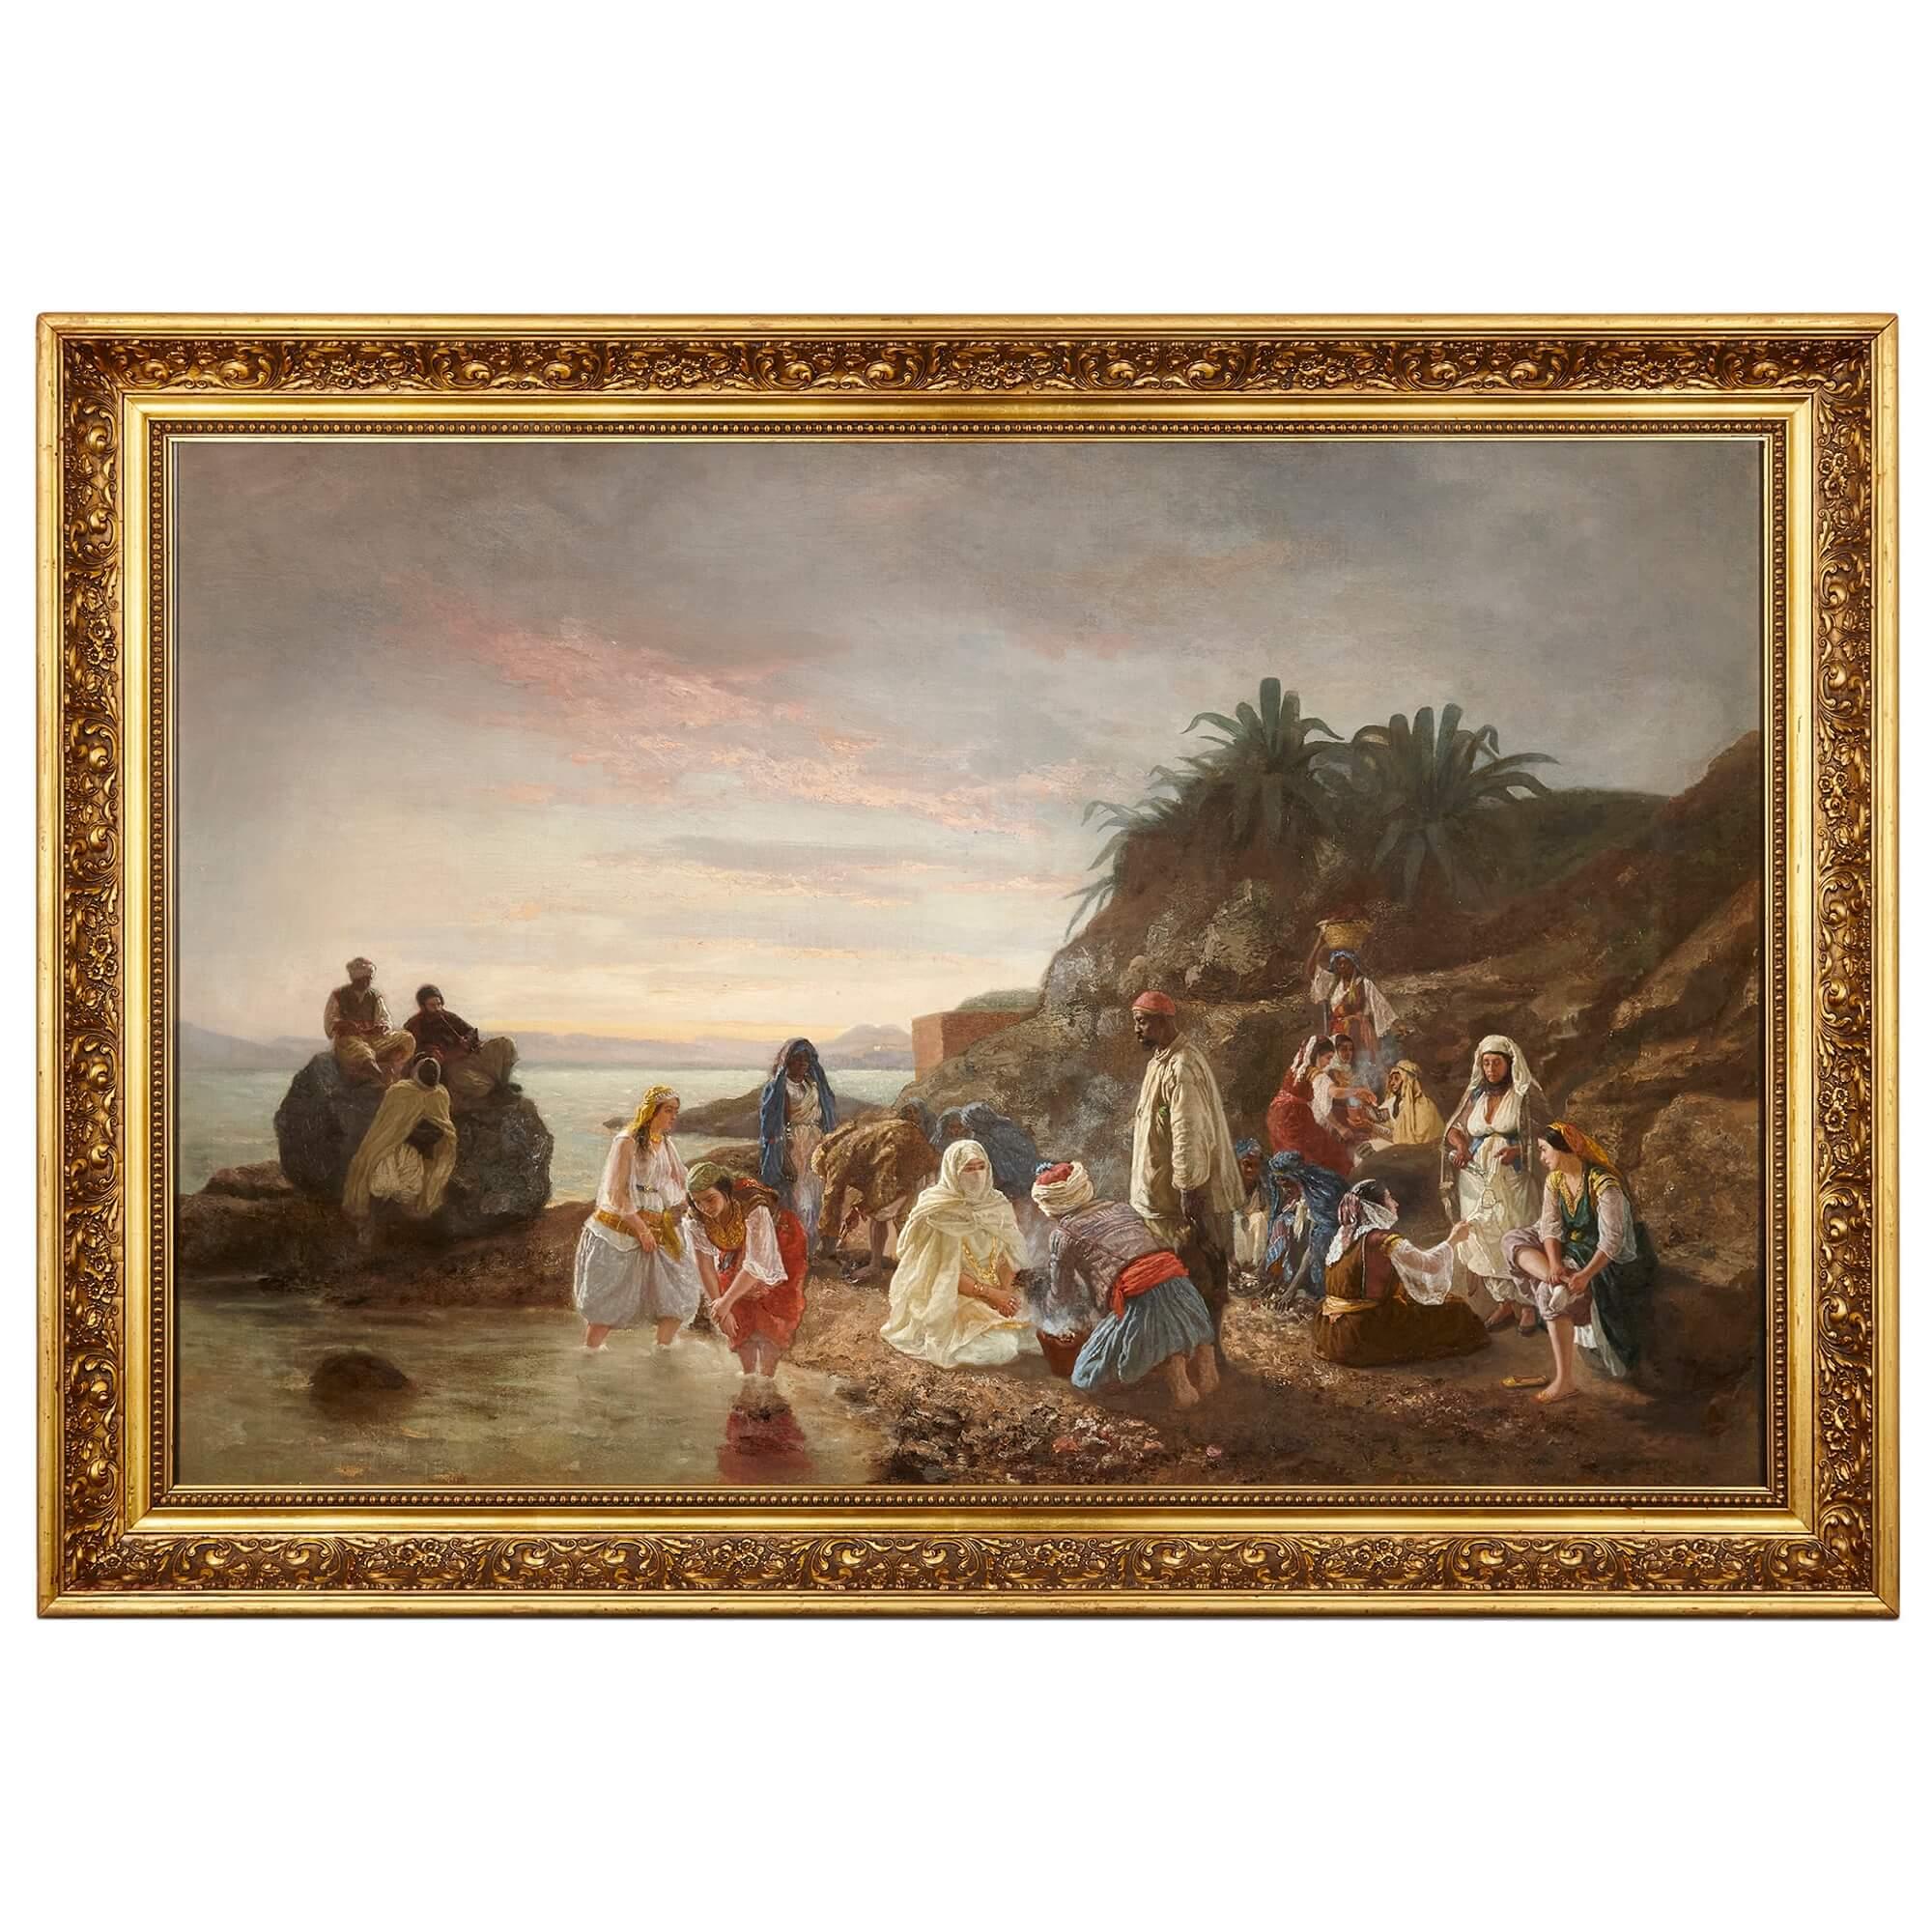 Geskel Saloman Figurative Painting - Large Orientalist Painting by G. Saloman Depicting Figures at the Shore